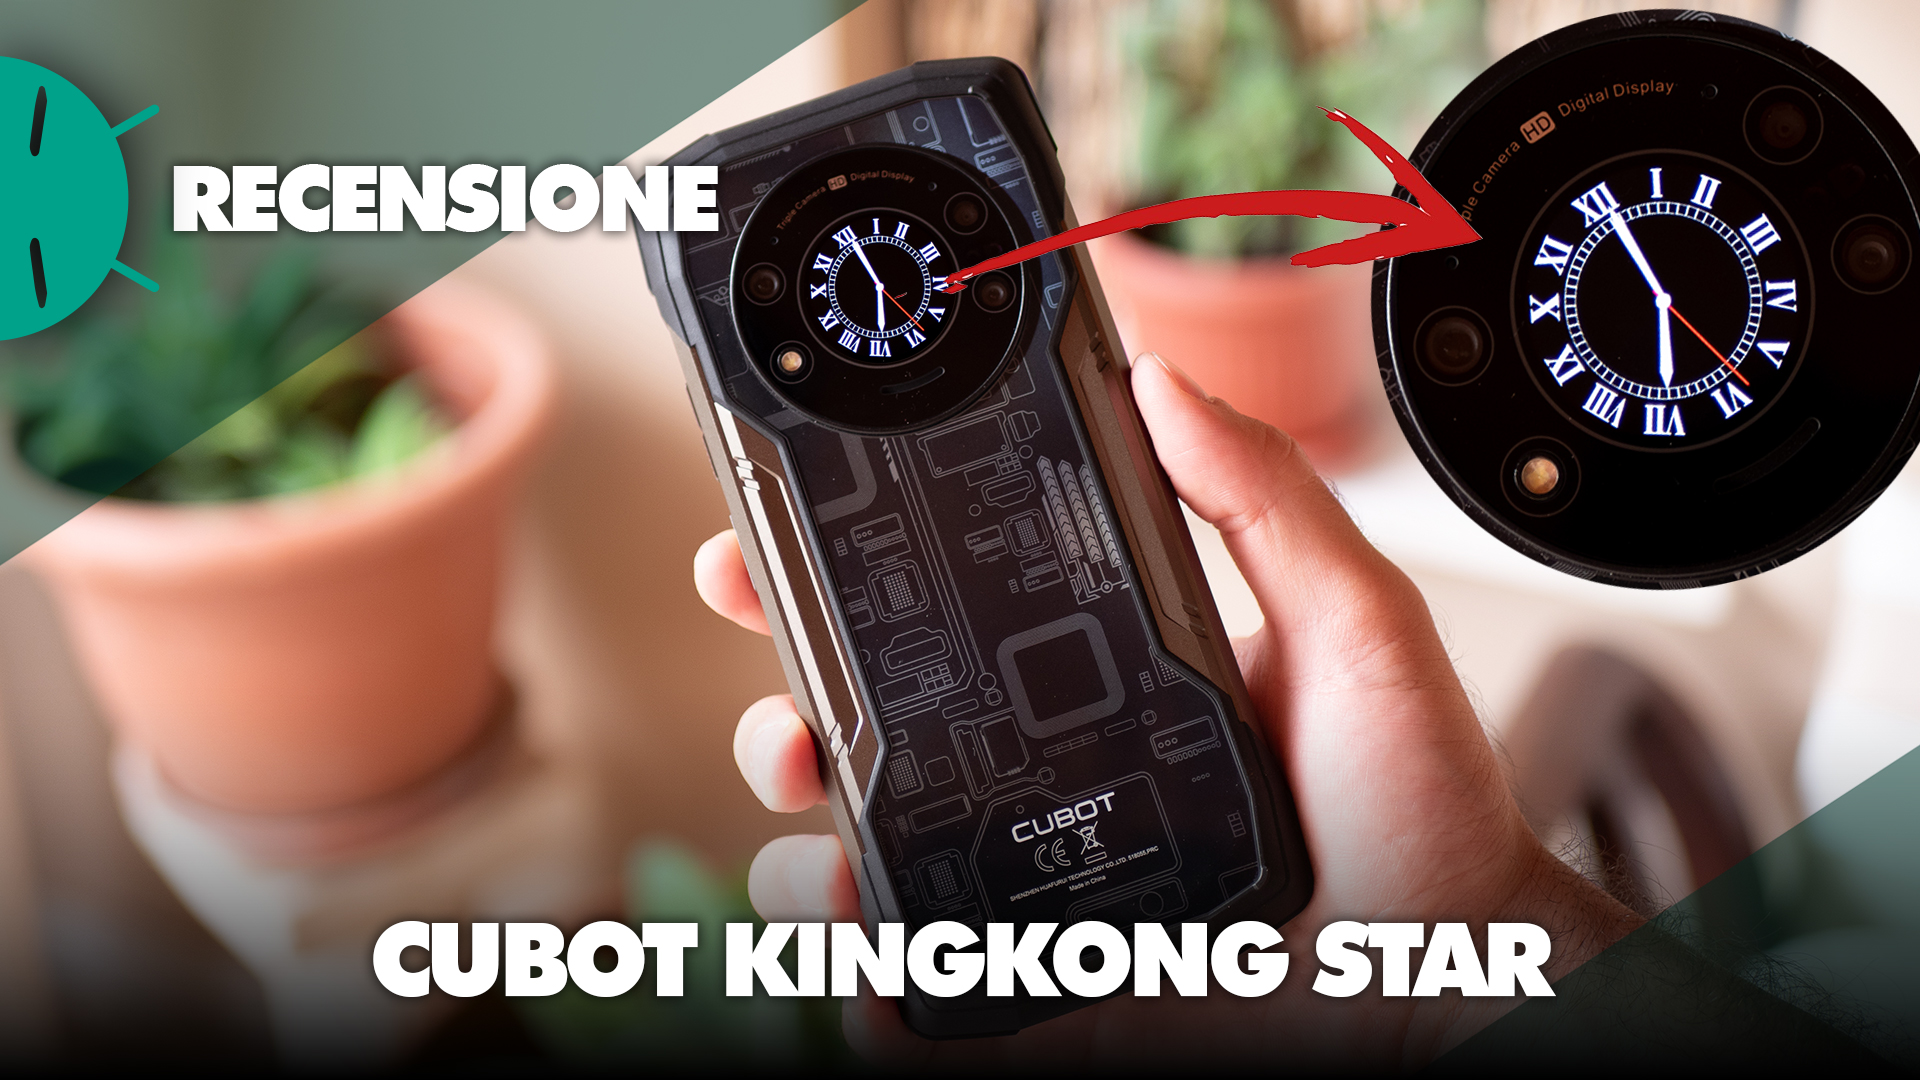 Cubot KingKong Power goes official with a 10600 mAh battery